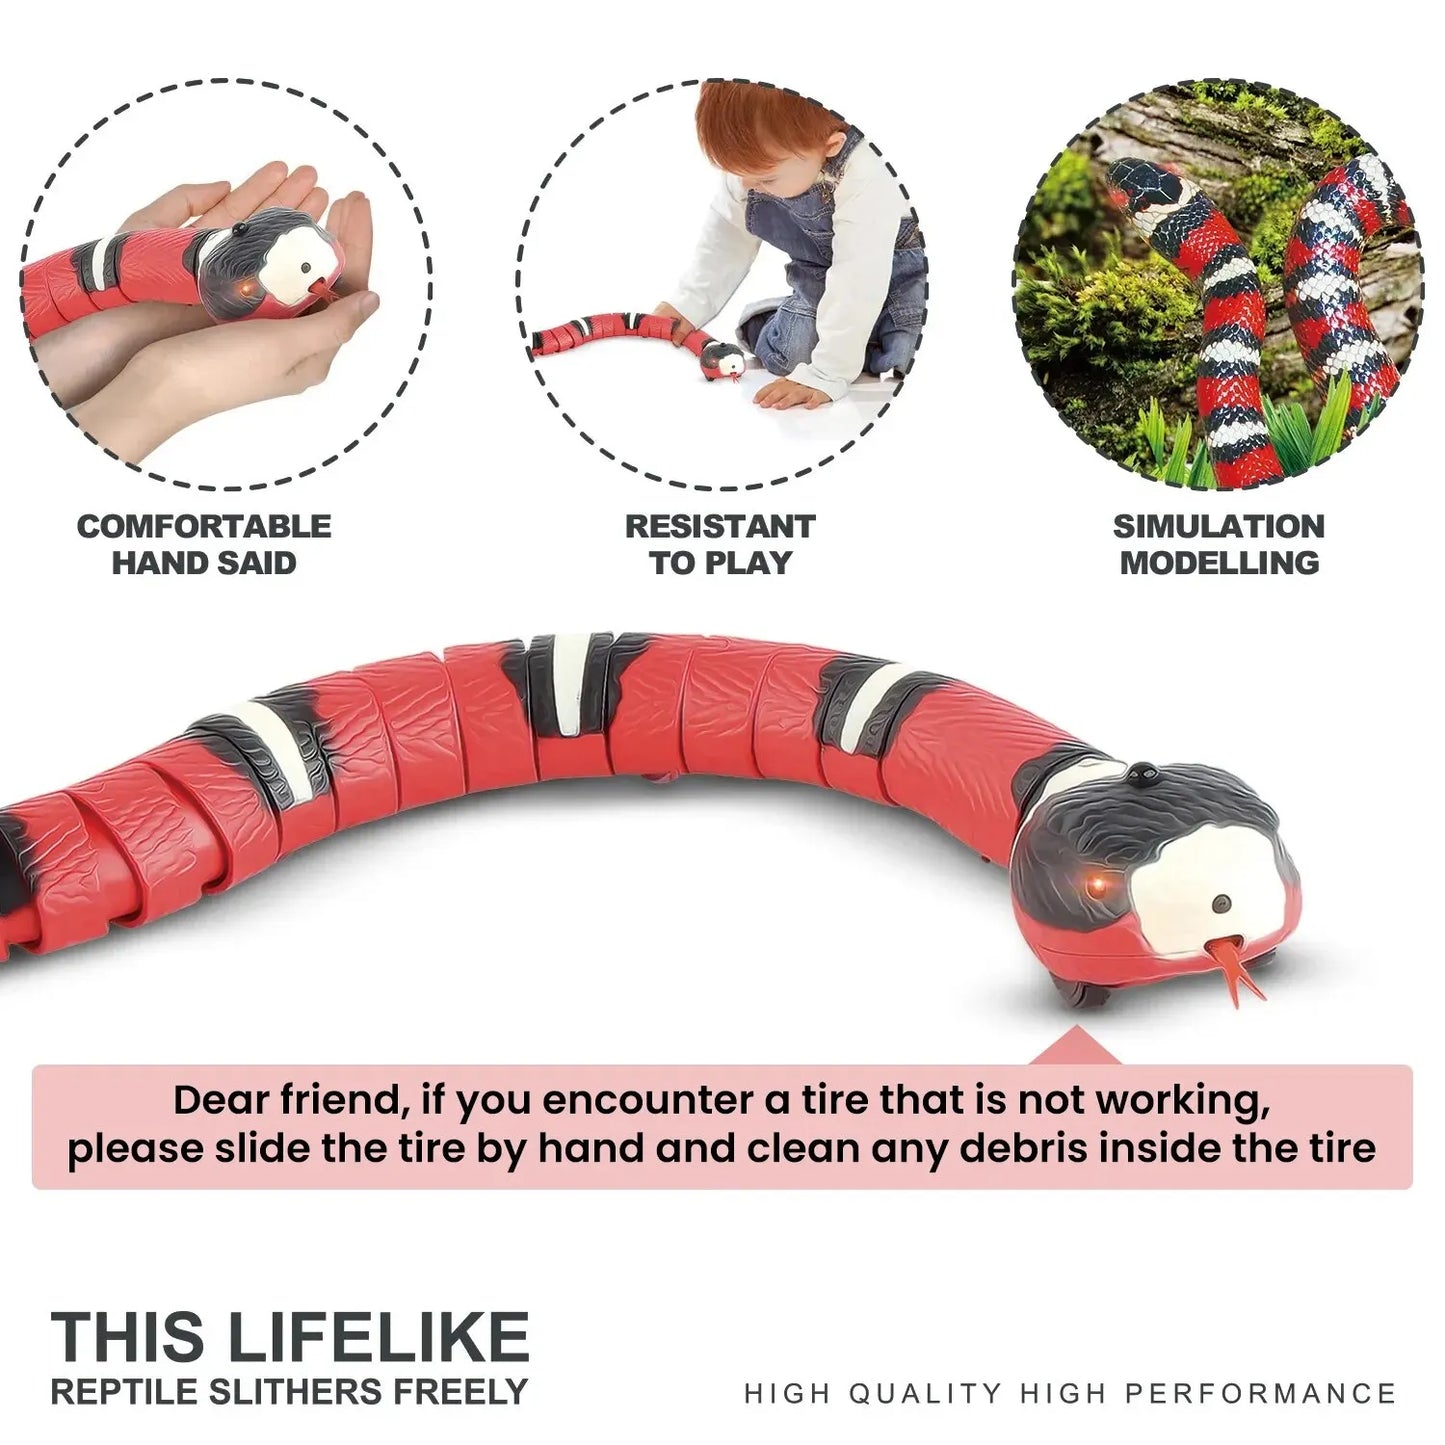 Cat Interactive Snake Toy